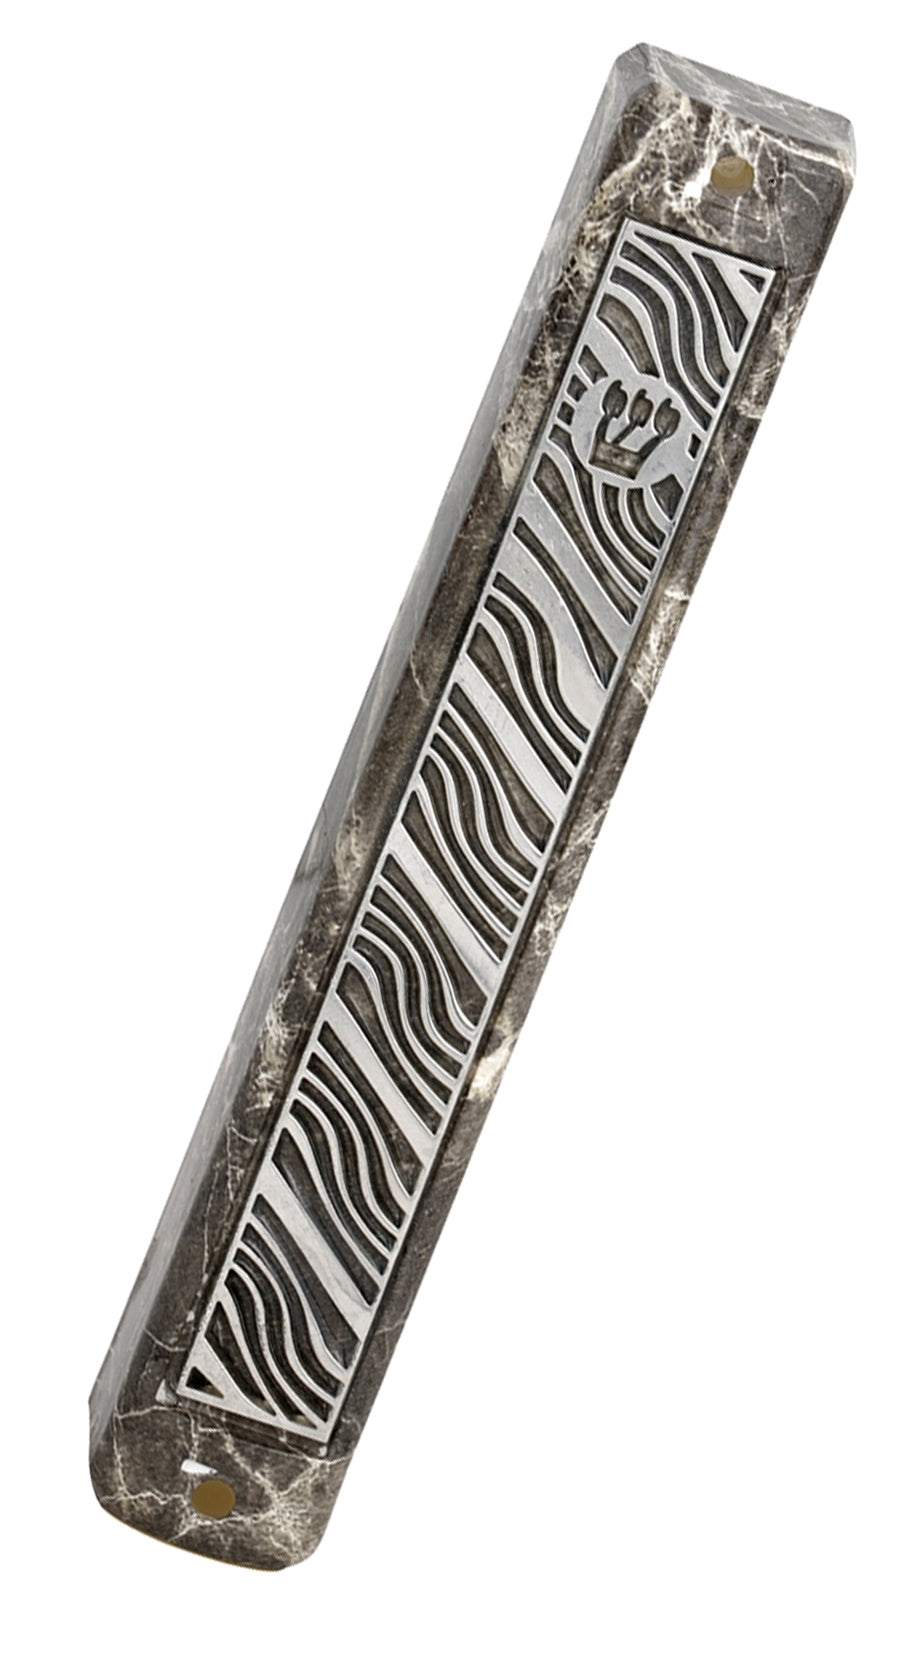 Marble Mezuzah Case with Diagonal Wavy Pattern on Plate